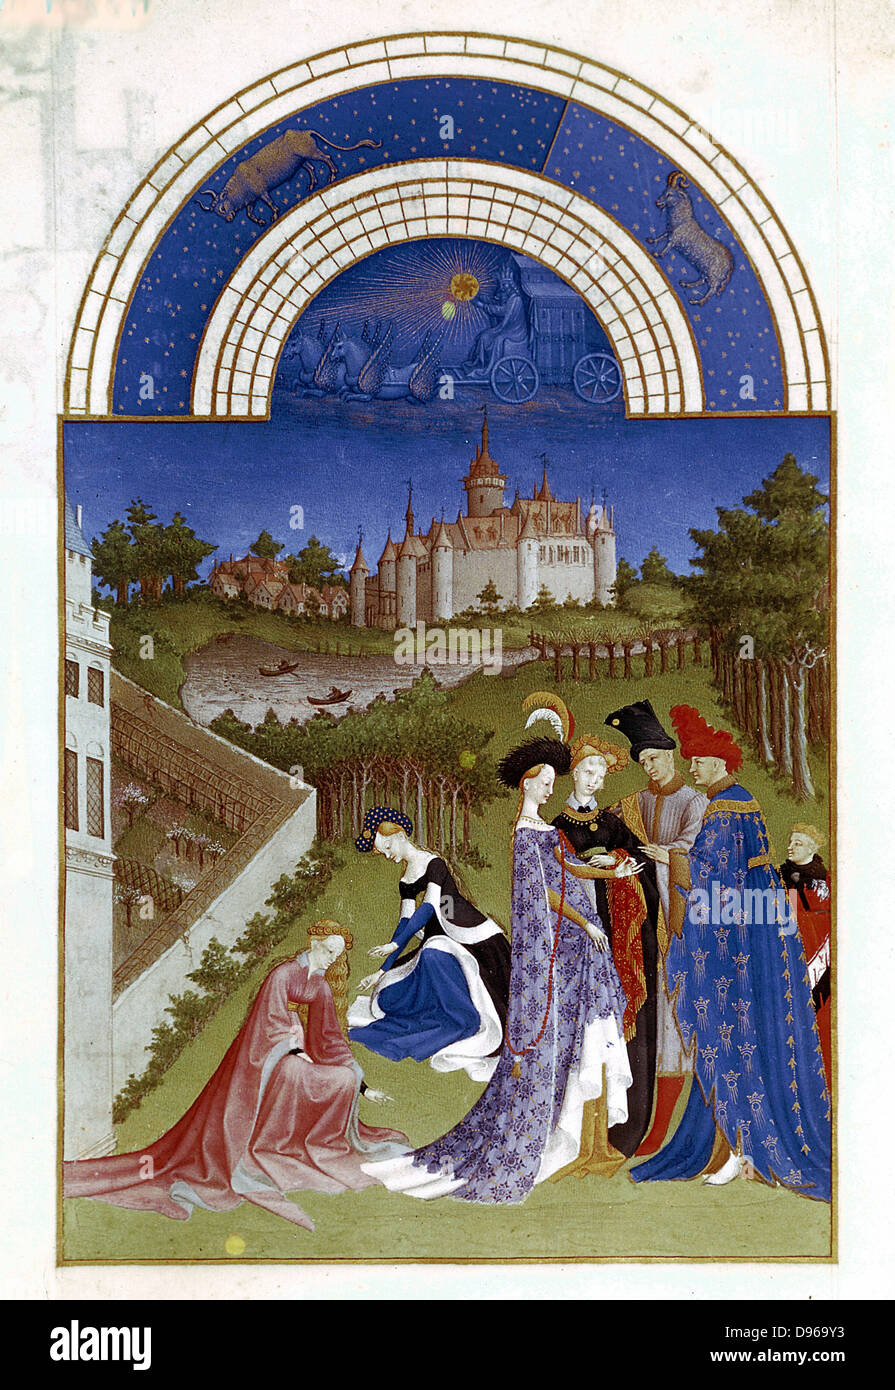 April: Planetary figure of Sun in his chariot: Zodiac figures of Aries (Ram) and Taurus (Bull) at top. Duc de Berry in blue robe, left with ladies and attendants in open air. In front of chateau boatmen net fish in dammed pond. Pollarded trees; Plantation; Walled Garden to right.  From 'Les Tres Riches Heures du Duc de Berry'  (Book of Hours). Illuminated manuscript by Limbourg Brothers pre 1416. Musee de Conde, Chantilly. Stock Photo